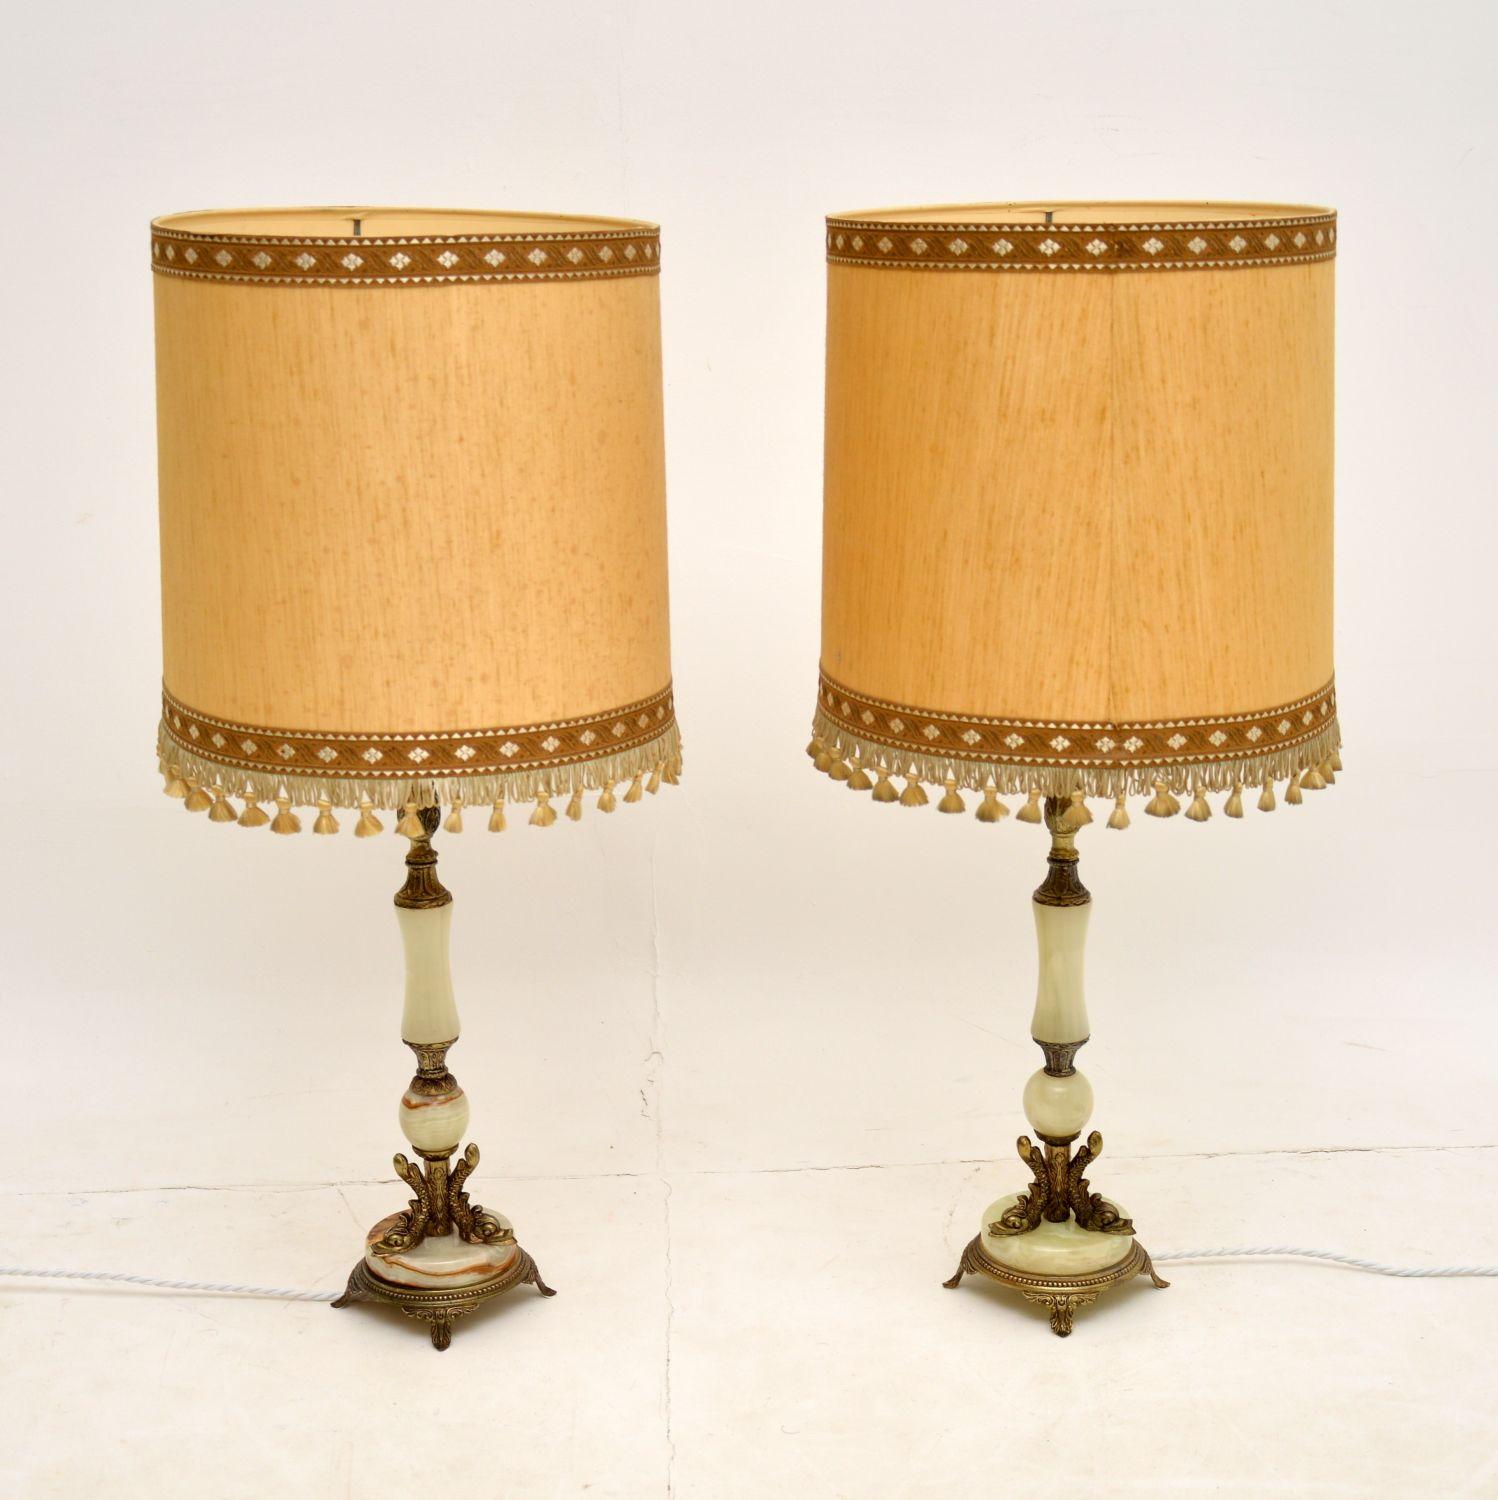 A stunning matched pair of vintage brass and onyx table lamps. These were most likely made in France, they date from the 1930-50’s.

The design is beautiful and these are of lovely quality. The brass work is fine and intricate, with interesting